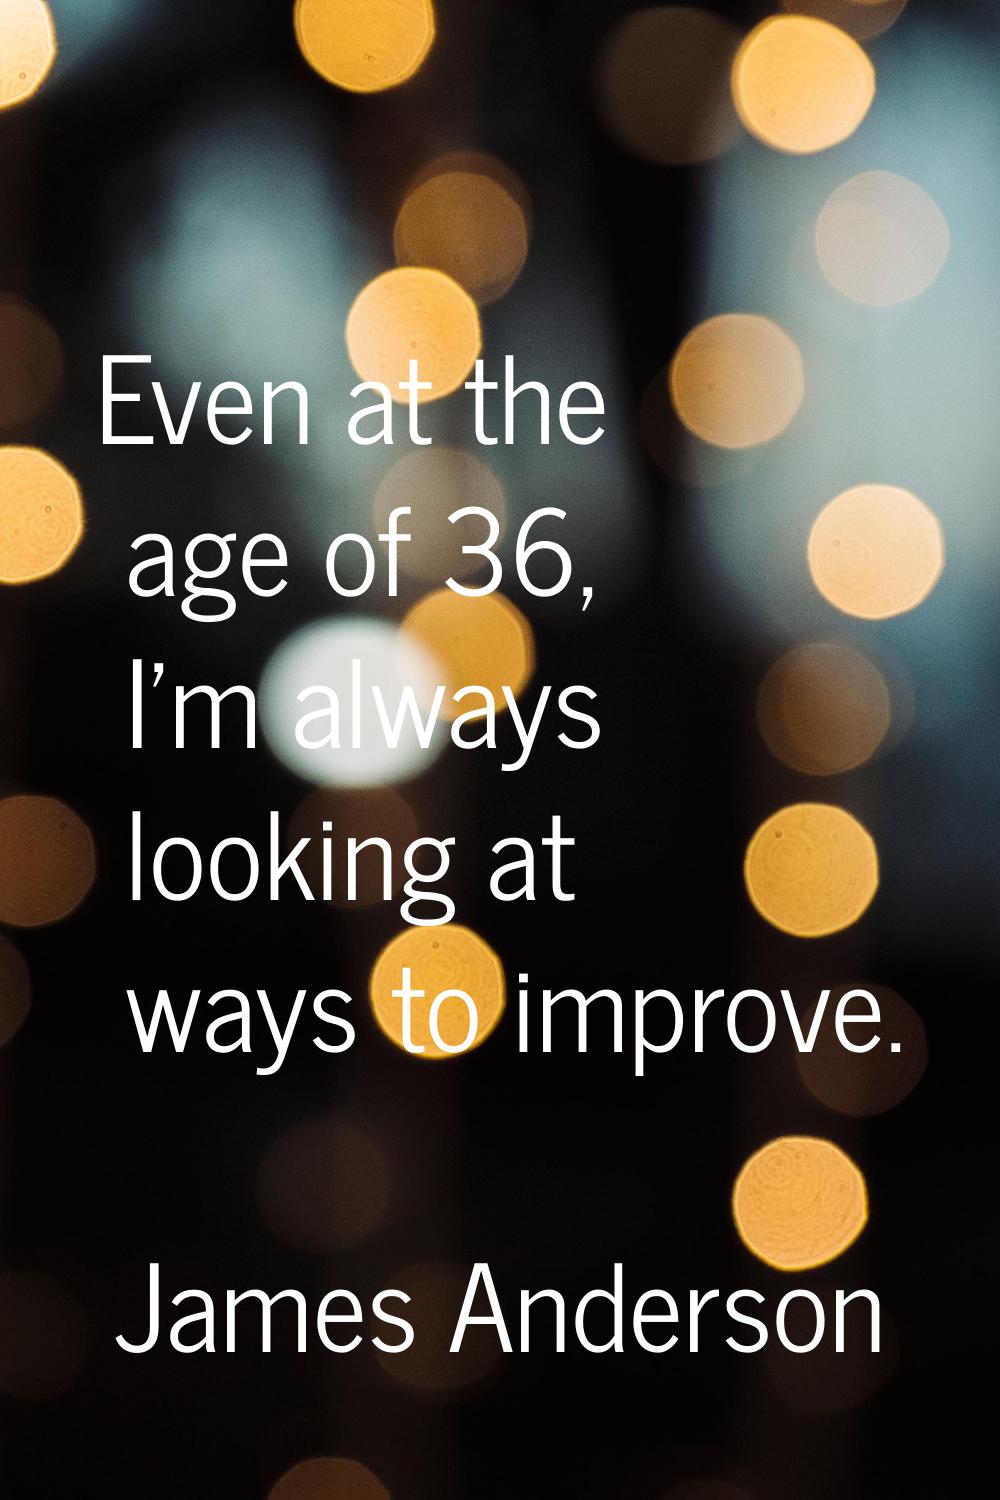 Even at the age of 36, I'm always looking at ways to improve.